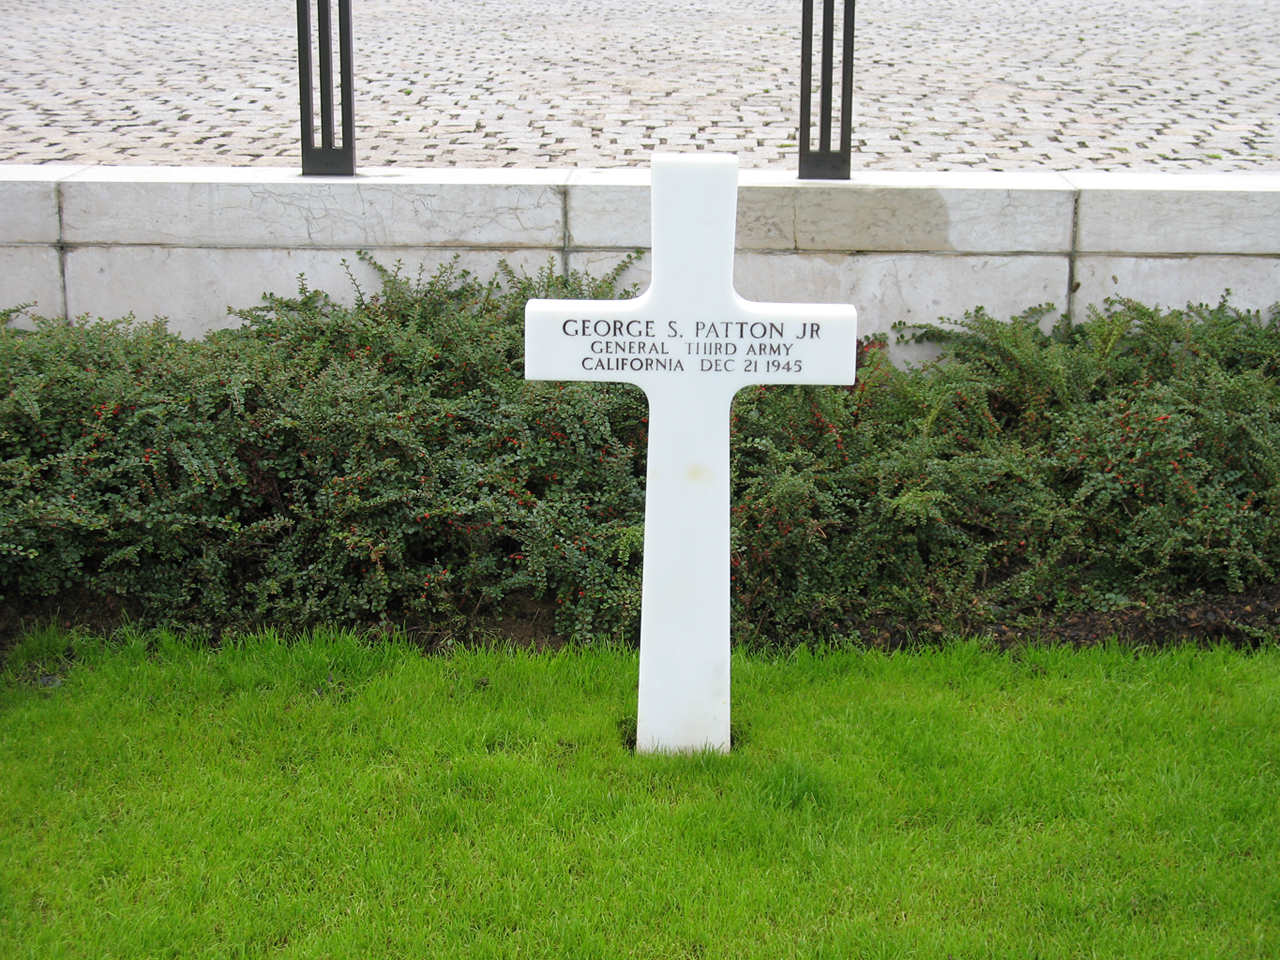 Grave of George Patton, Hamm, Luxembourg, 30 Aug 2006